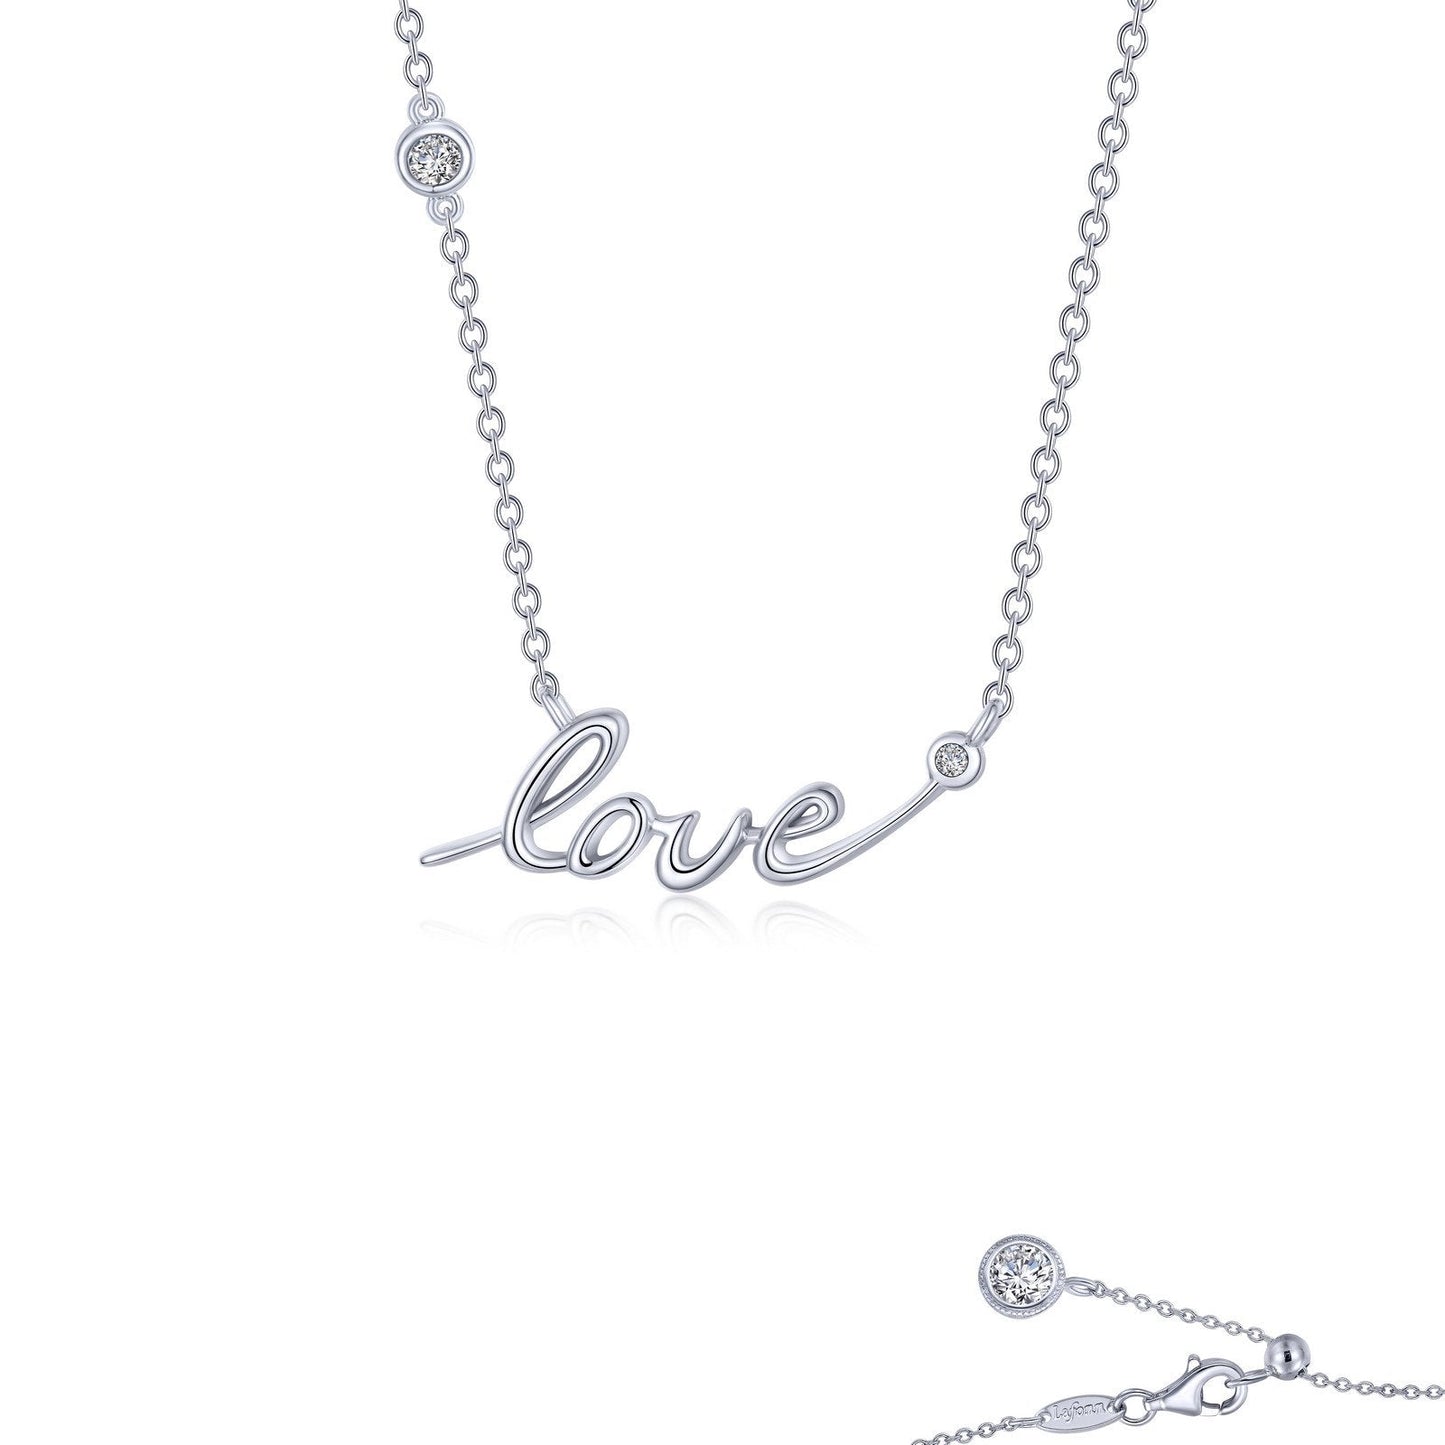 Lafonn Love Word Necklace Simulated Diamond NECKLACES Platinum 0.28 CTS Approx. 7.3mm (W) x 22.5mm (H)